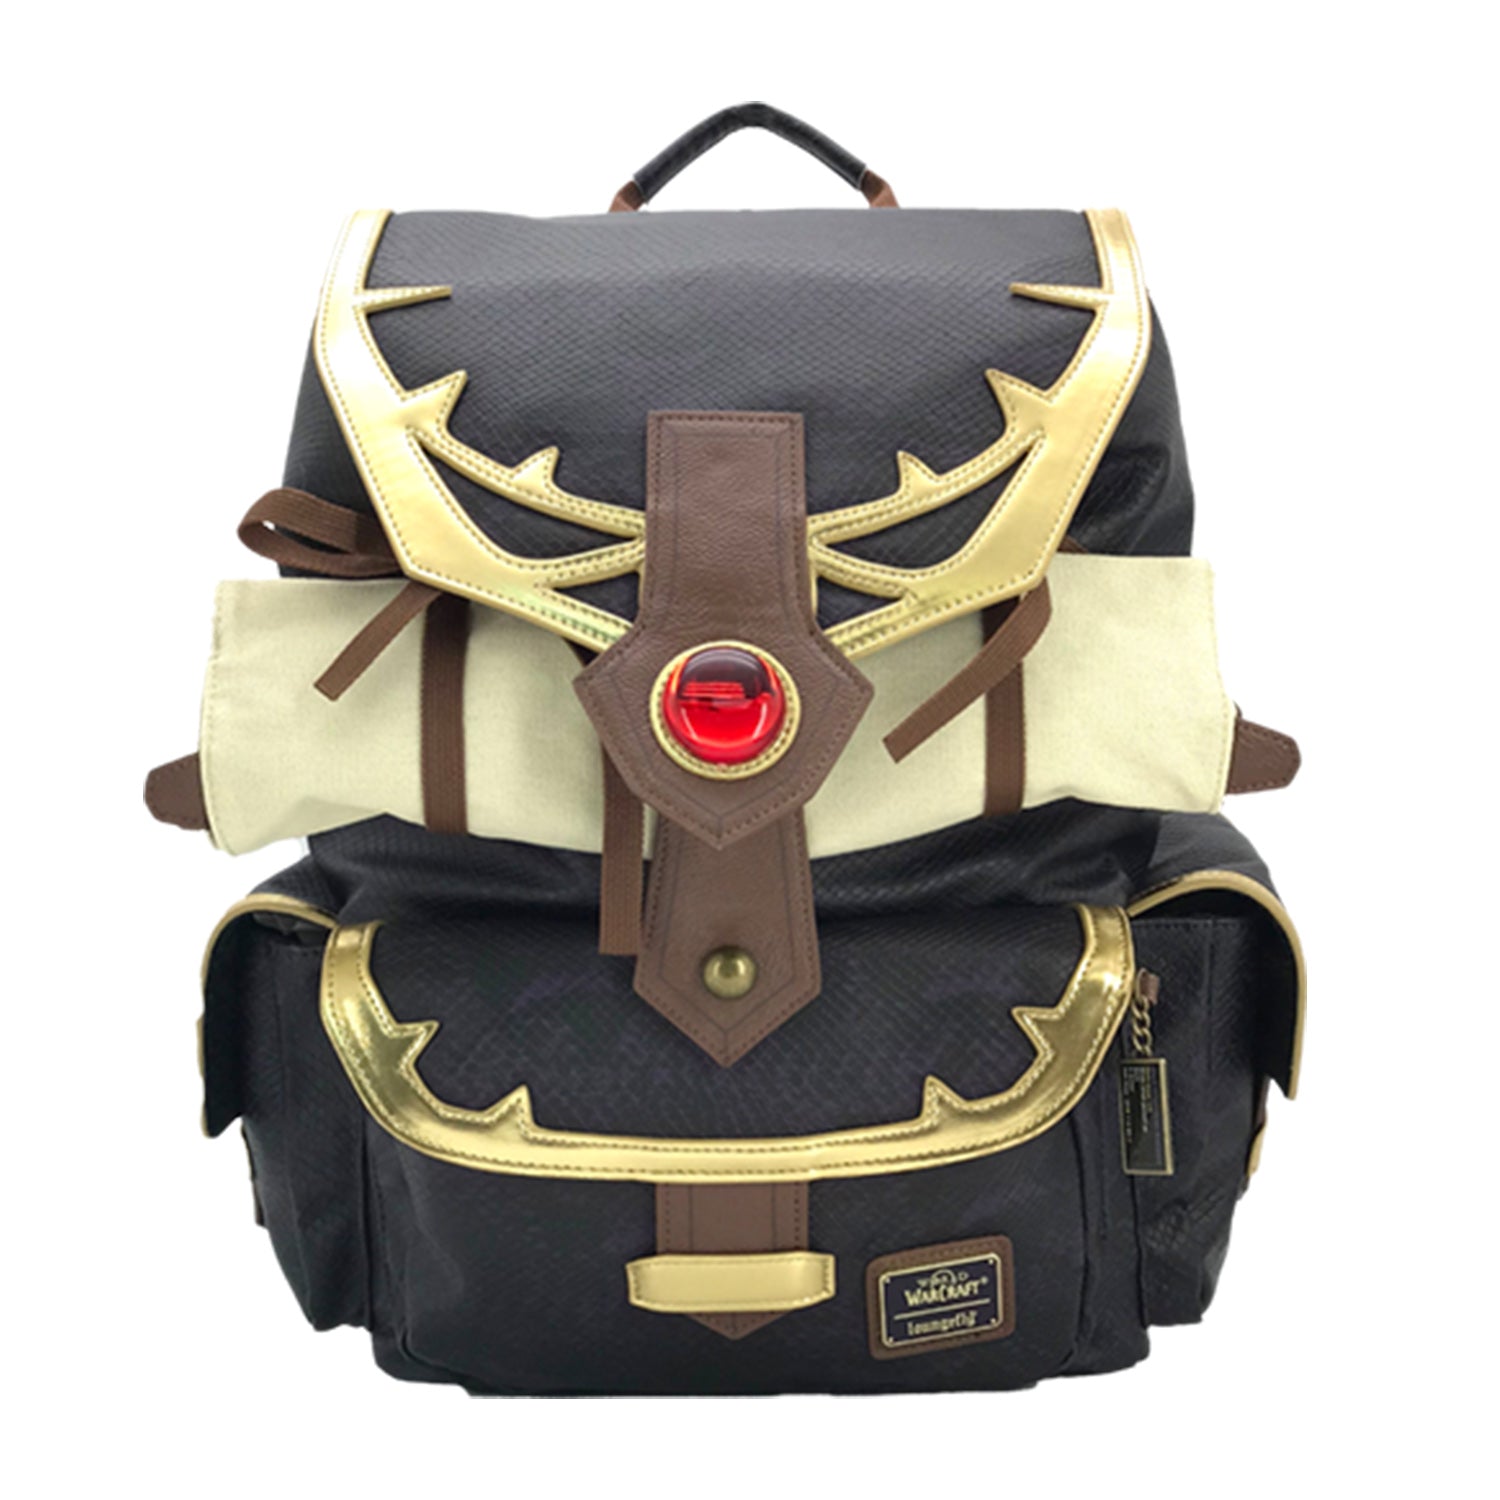 World of Warcraft Dragonscale Backpack - Front View of Bag